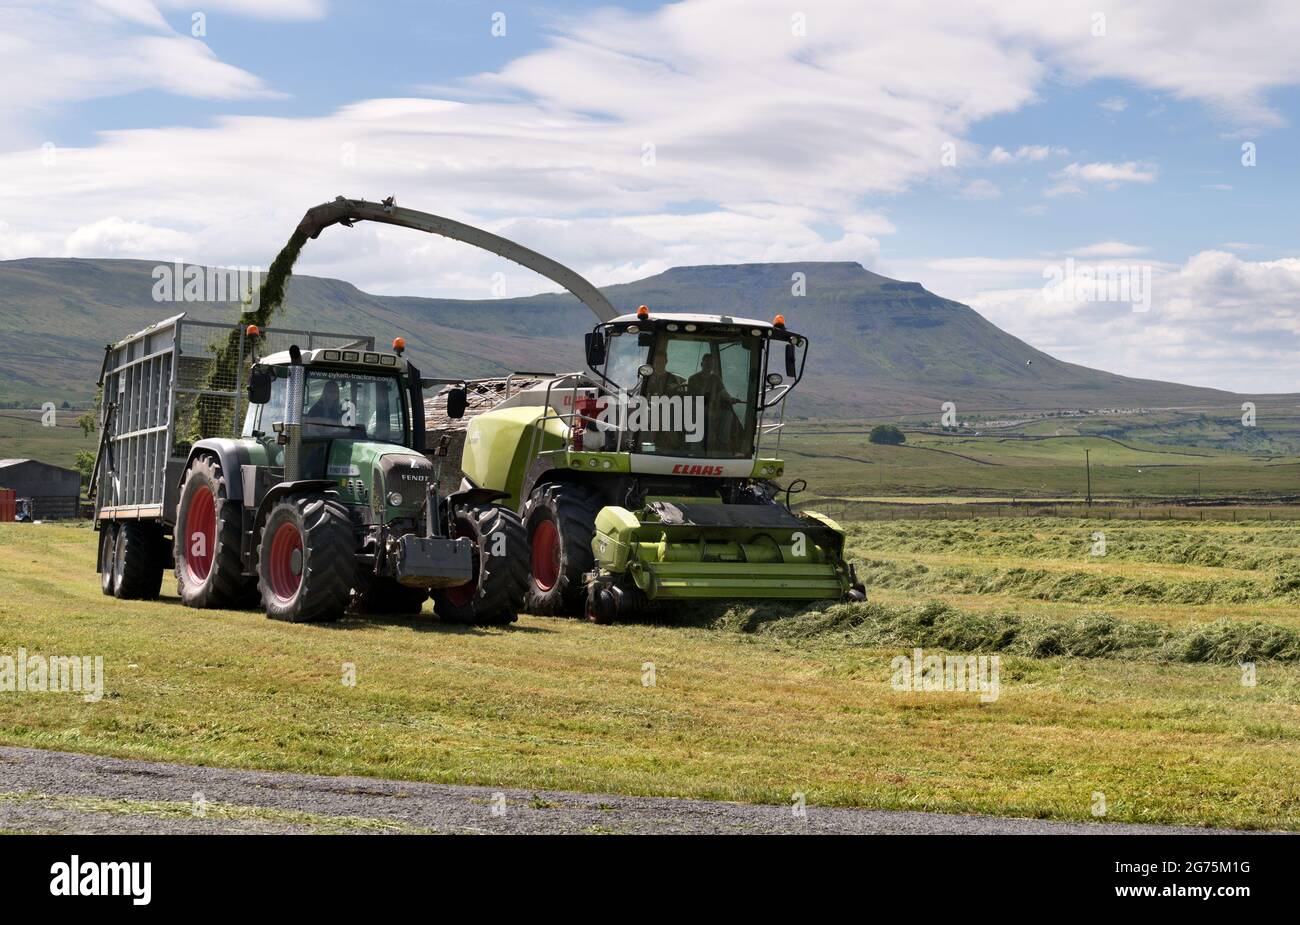 With Ingleborough as a backdrop, a forage harvester works making silage for livestock feeding, Gunnerfleet, Ribblehead, Yorkshire Dales National Park. Stock Photo